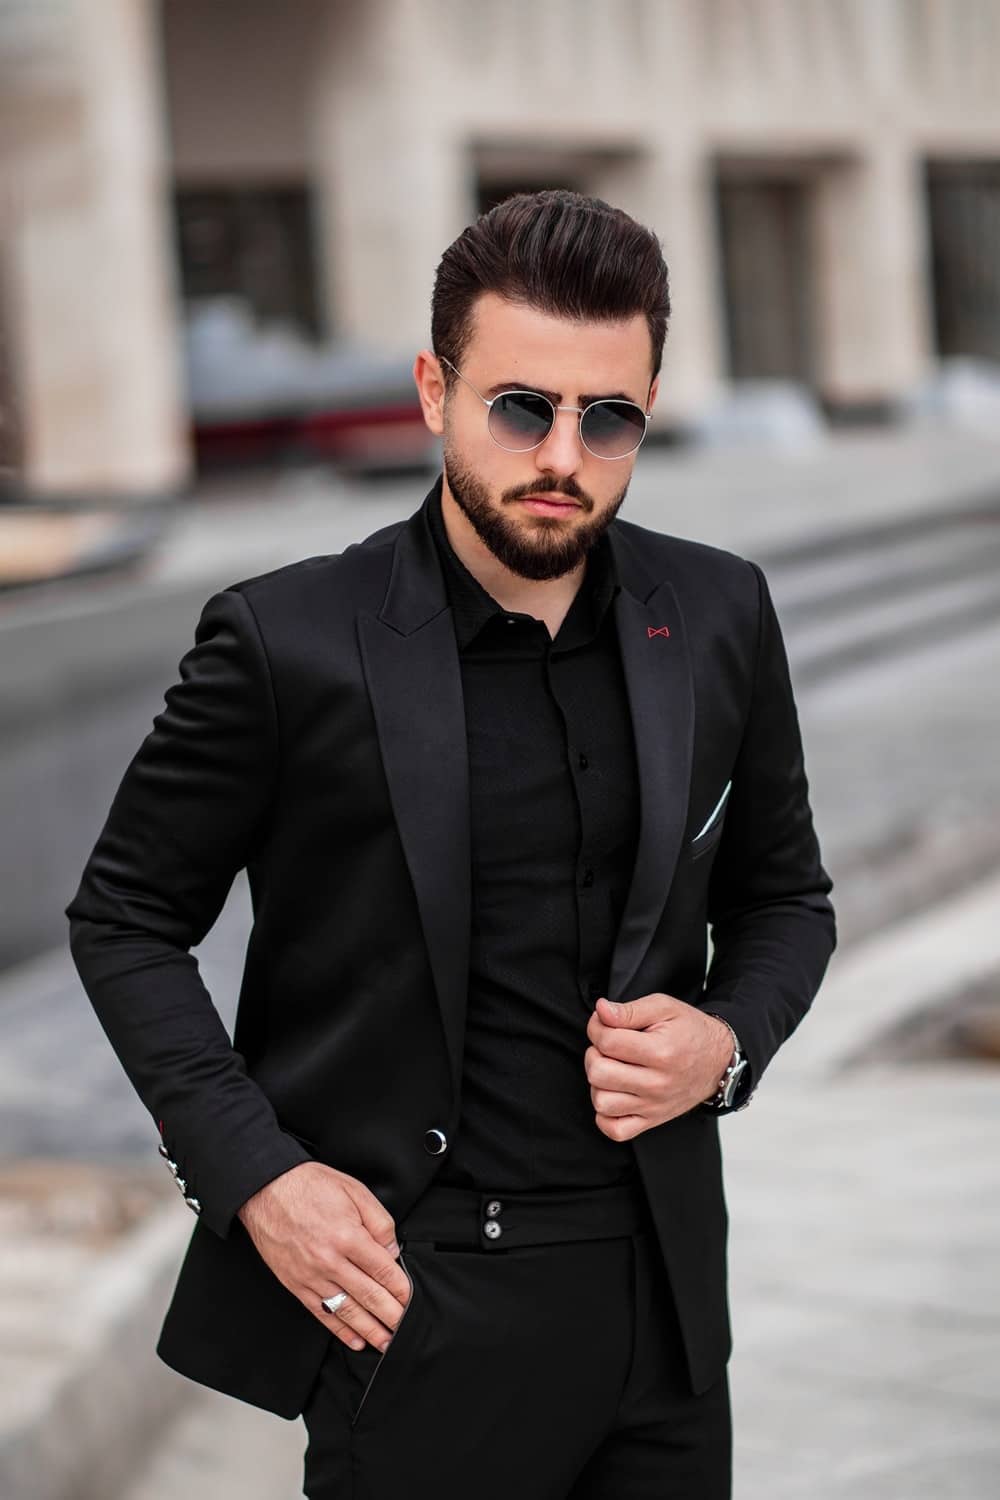 2022 Outfit Trends for Men